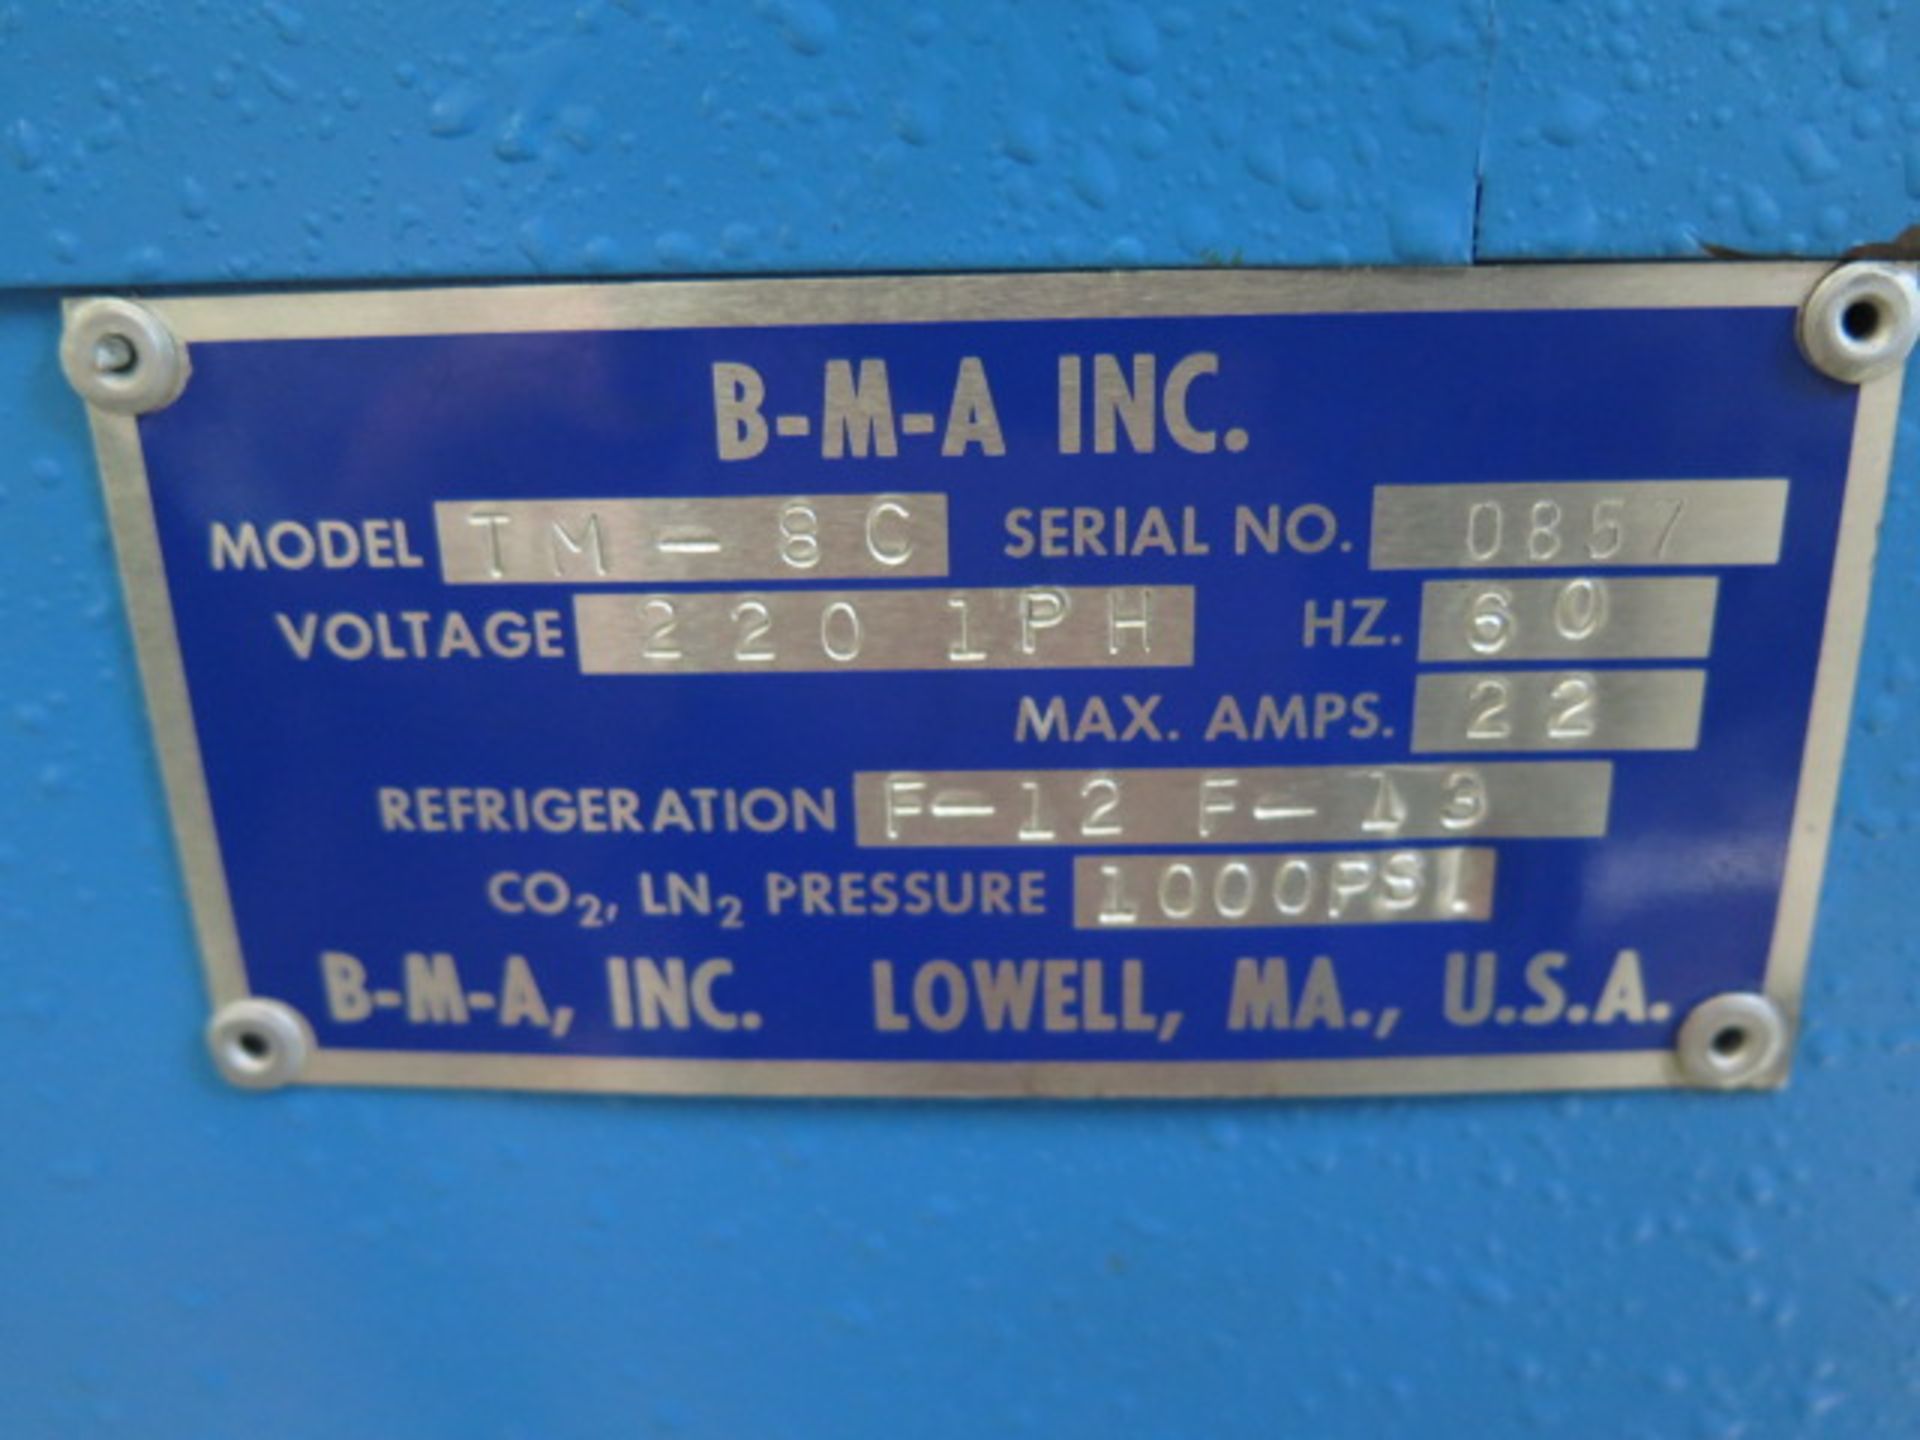 BMA mdl. TM-8C Environmental Chamber s/n 0857 (SOLD AS-IS - NO WARRANTY) - Image 8 of 8